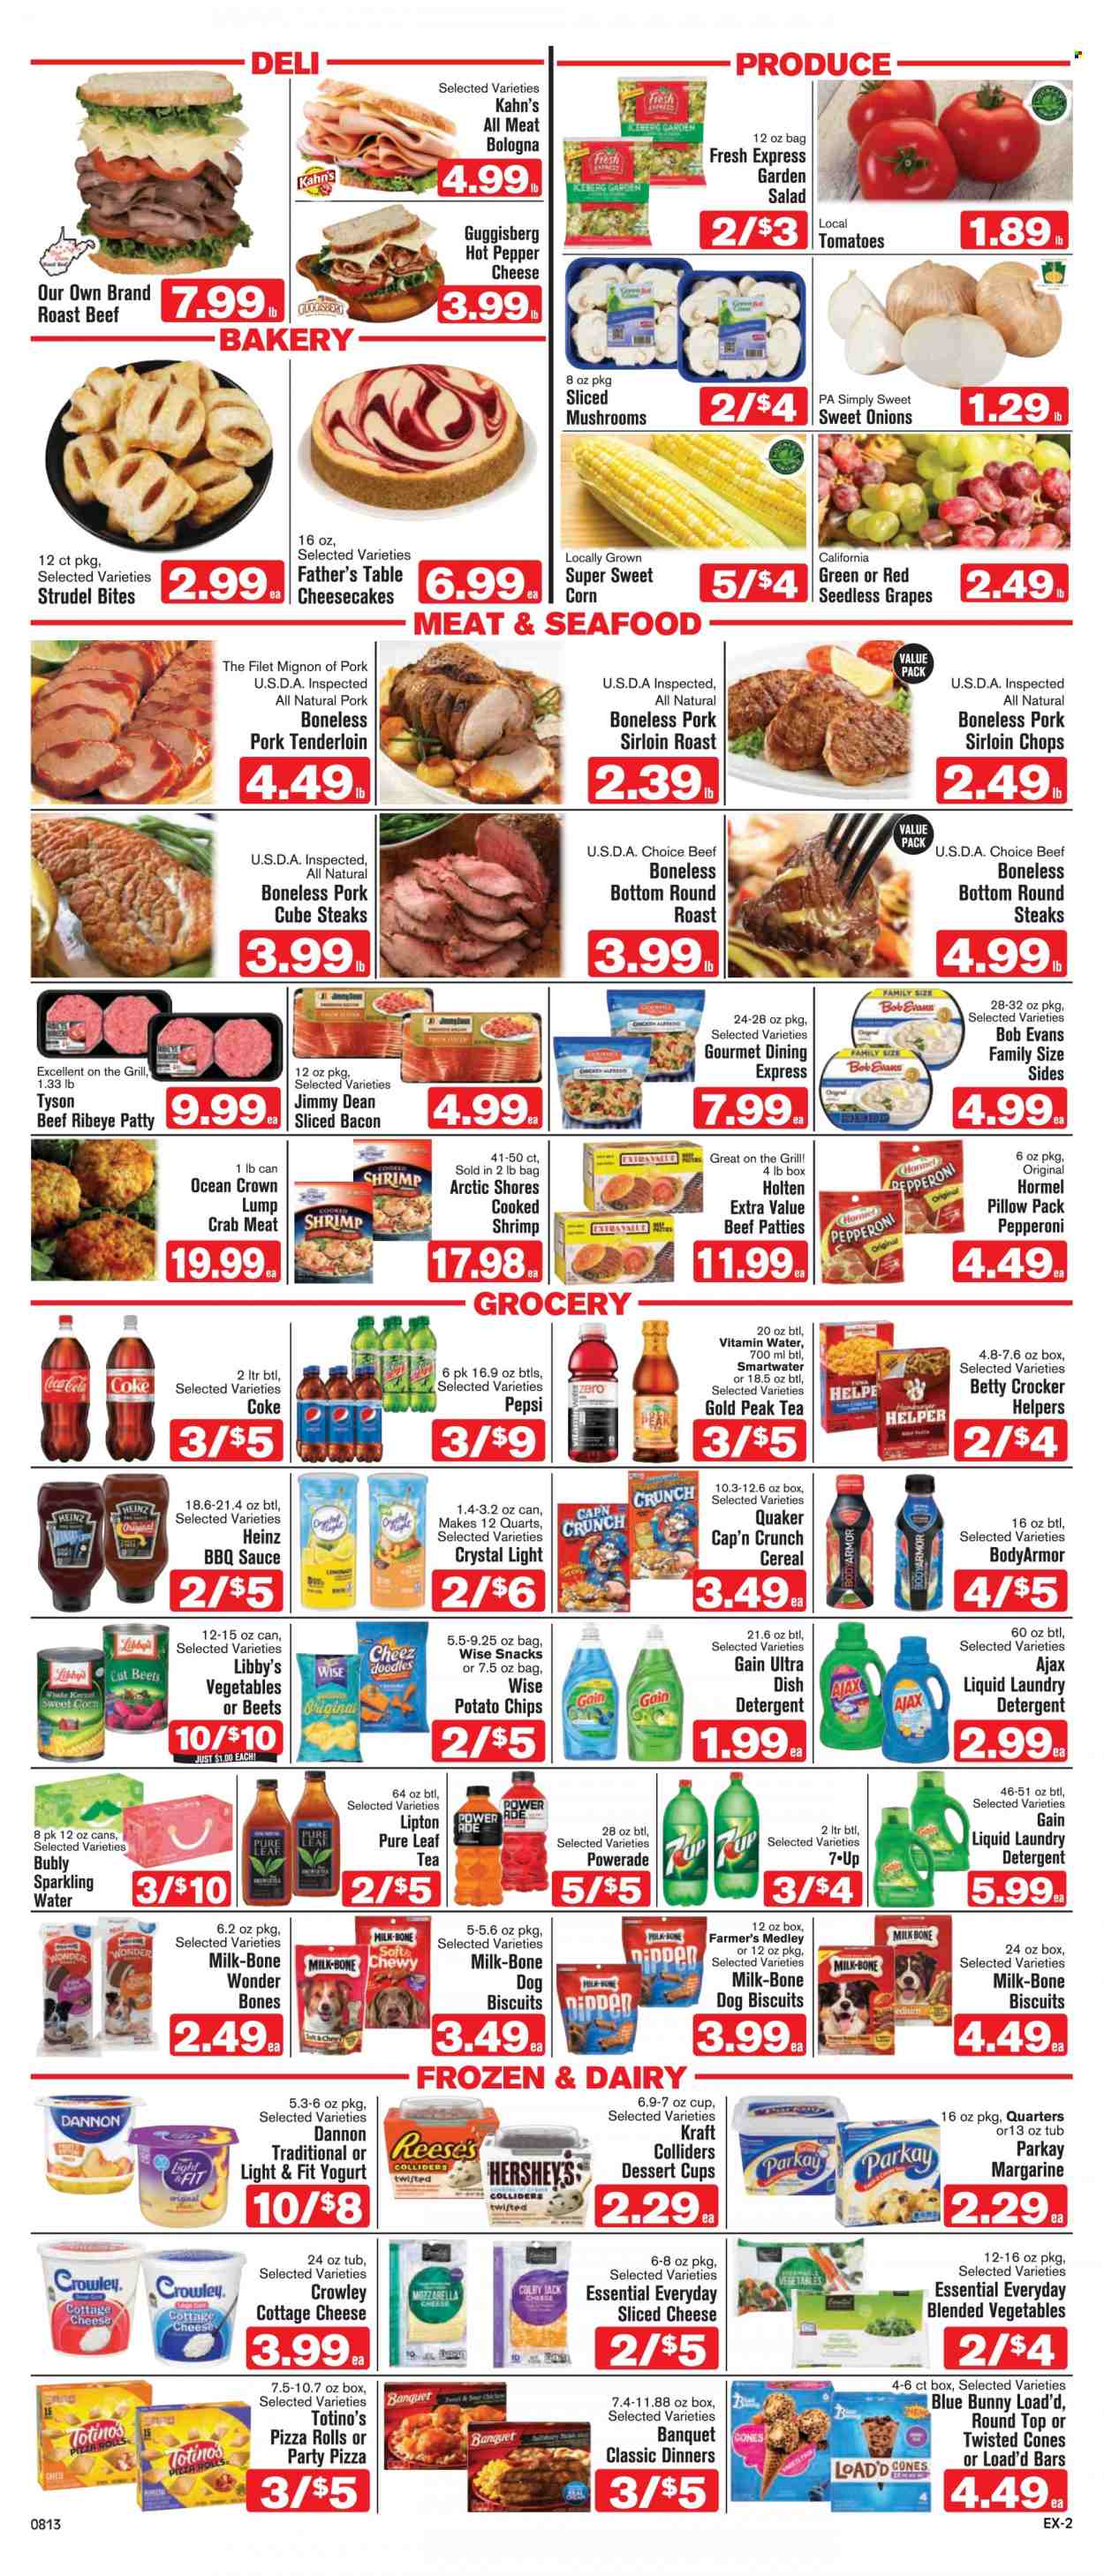 thumbnail - Shop ‘n Save Express Flyer - 08/13/2022 - 08/19/2022 - Sales products - pizza rolls, strudel, Father's Table, corn, salad, sweet corn, grapes, seedless grapes, beef meat, steak, beef tenderloin, round roast, roast beef, Bob Evans, pork loin, pork meat, pork tenderloin, crab meat, tuna, seafood, crab, shrimps, Arctic Shores, pizza, sauce, Quaker, Kraft®, Jimmy Dean, Hormel, bacon, pepperoni, Colby cheese, cottage cheese, sliced cheese, yoghurt, Dannon, milk, margarine, Reese's, Hershey's, Blue Bunny, cookies, snack, potato chips, brewer, Heinz, cereals, Cap'n Crunch, BBQ sauce, Coca-Cola, Powerade, Pepsi, Lipton, Gold Peak Tea, sparkling water, Smartwater, vitamin water, tea, Pure Leaf, detergent, Gain, Ajax, laundry detergent, dishwasher cleaner, animal treats, dog food, dog biscuits. Page 2.